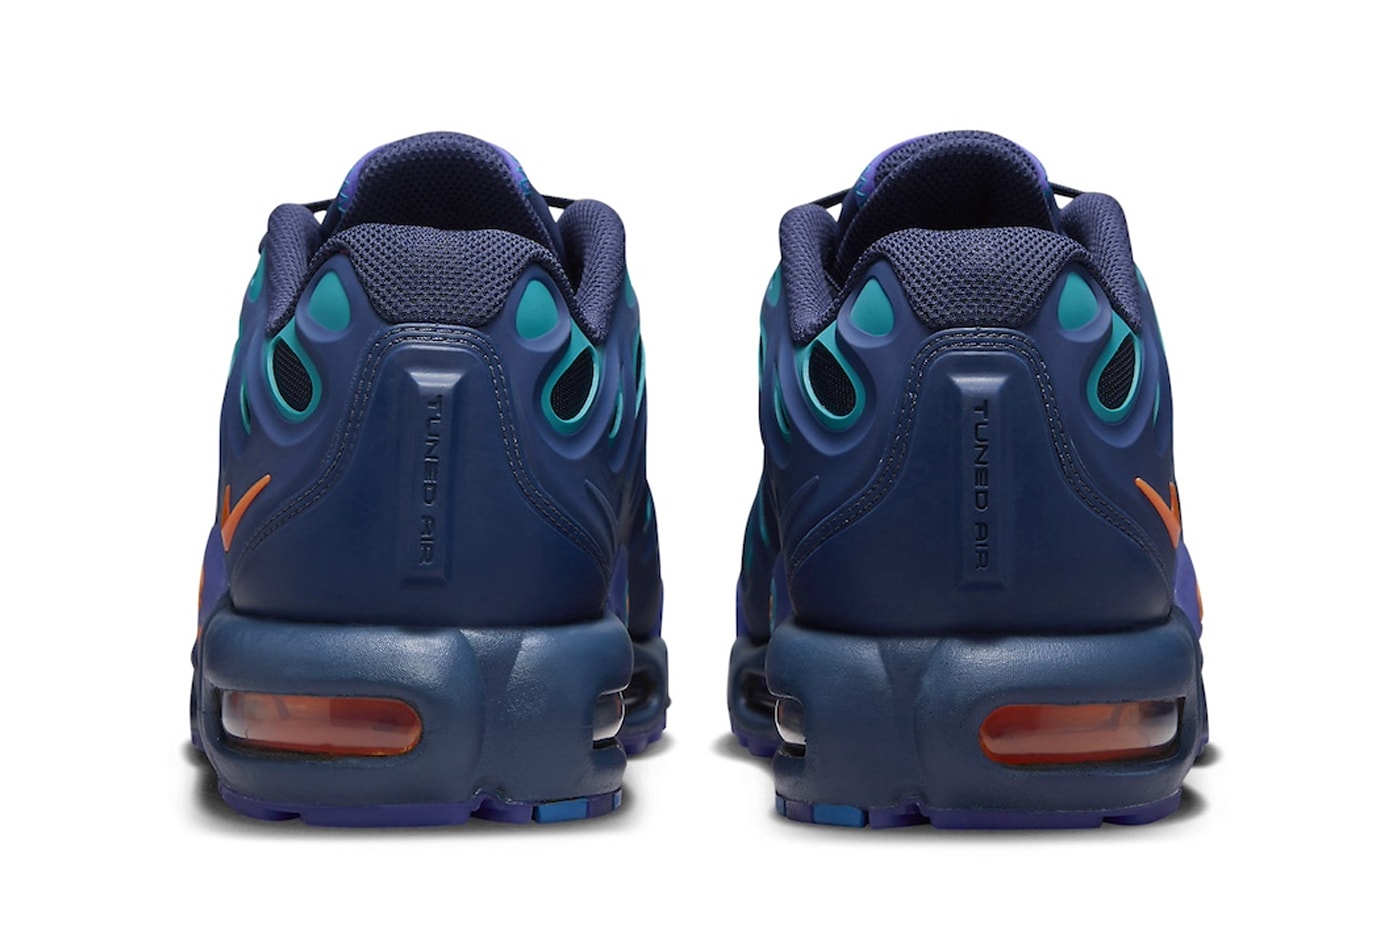 Nike Air Max Plus Drift Surfaces in "Midnight Navy" FD4290-400 release info total orange air max day sneaker comfort swoosh colorful eclectic